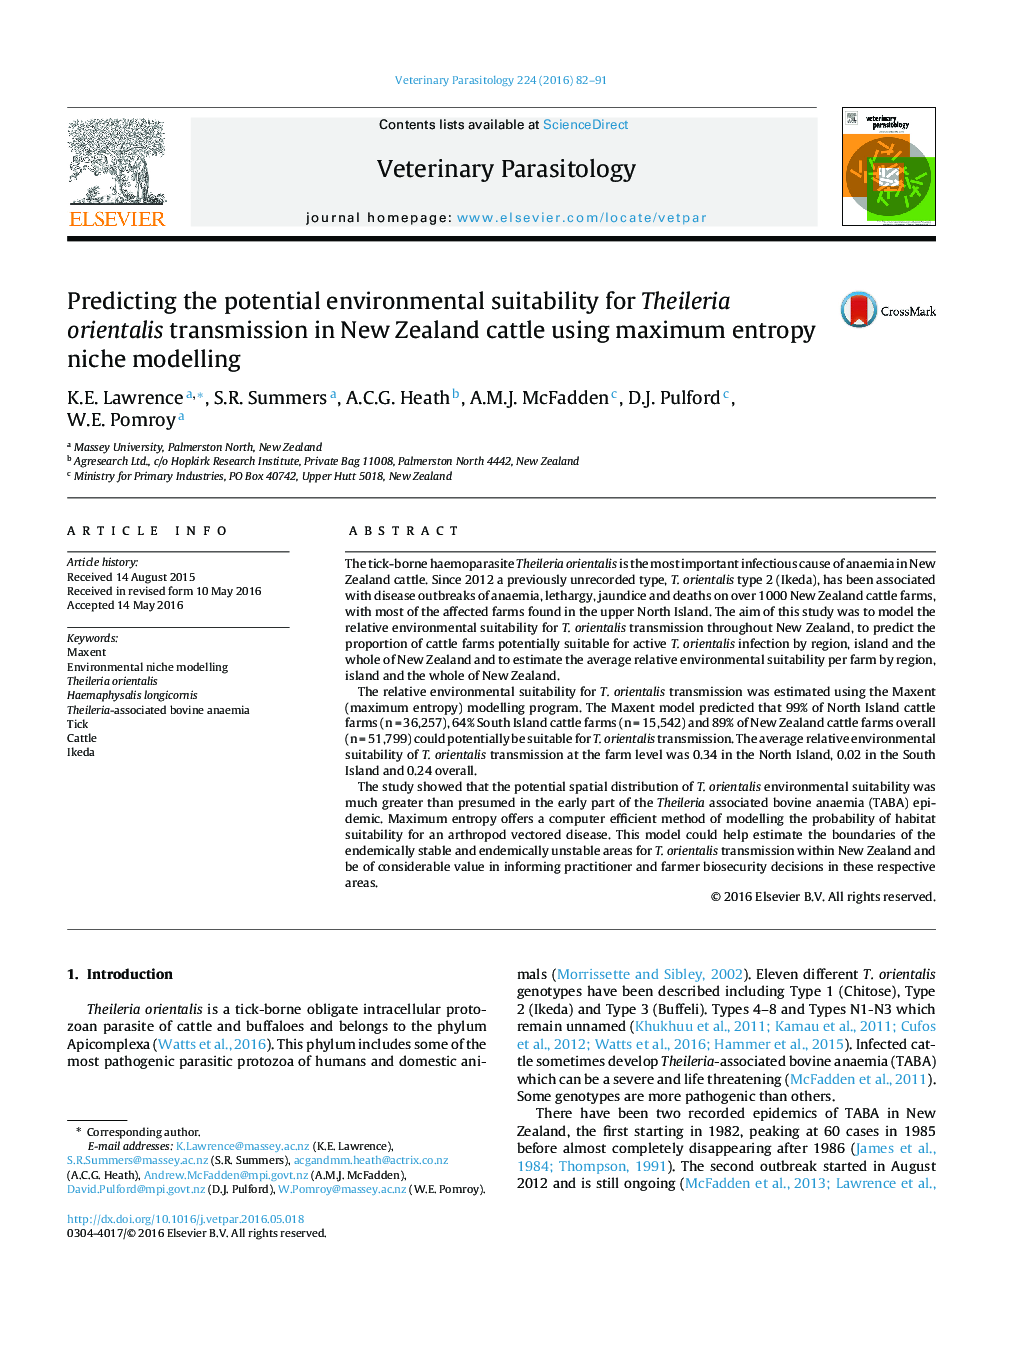 Predicting the potential environmental suitability for Theileria orientalis transmission in New Zealand cattle using maximum entropy niche modelling